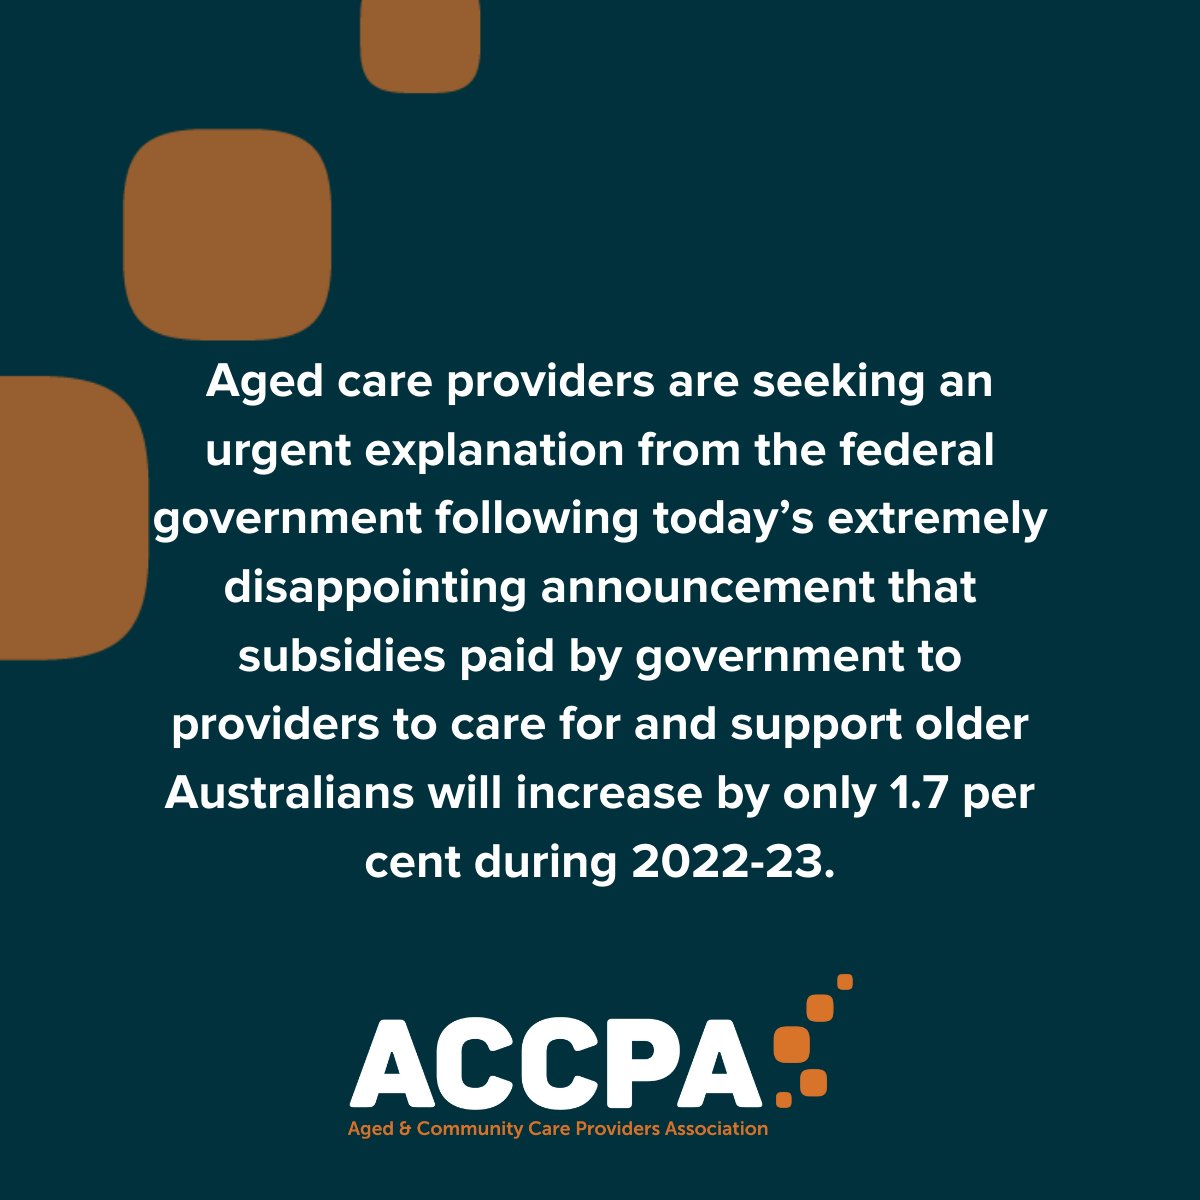 #Agedcare providers are seeking an urgent explanation following today’s disappointing announcement that Gov subsidies will only increase by 1.7 per cent during 2022-23. Read more > bit.ly/3ud0V5g Take Action! Click bit.ly/TakeActionforA… to contact your local Member.